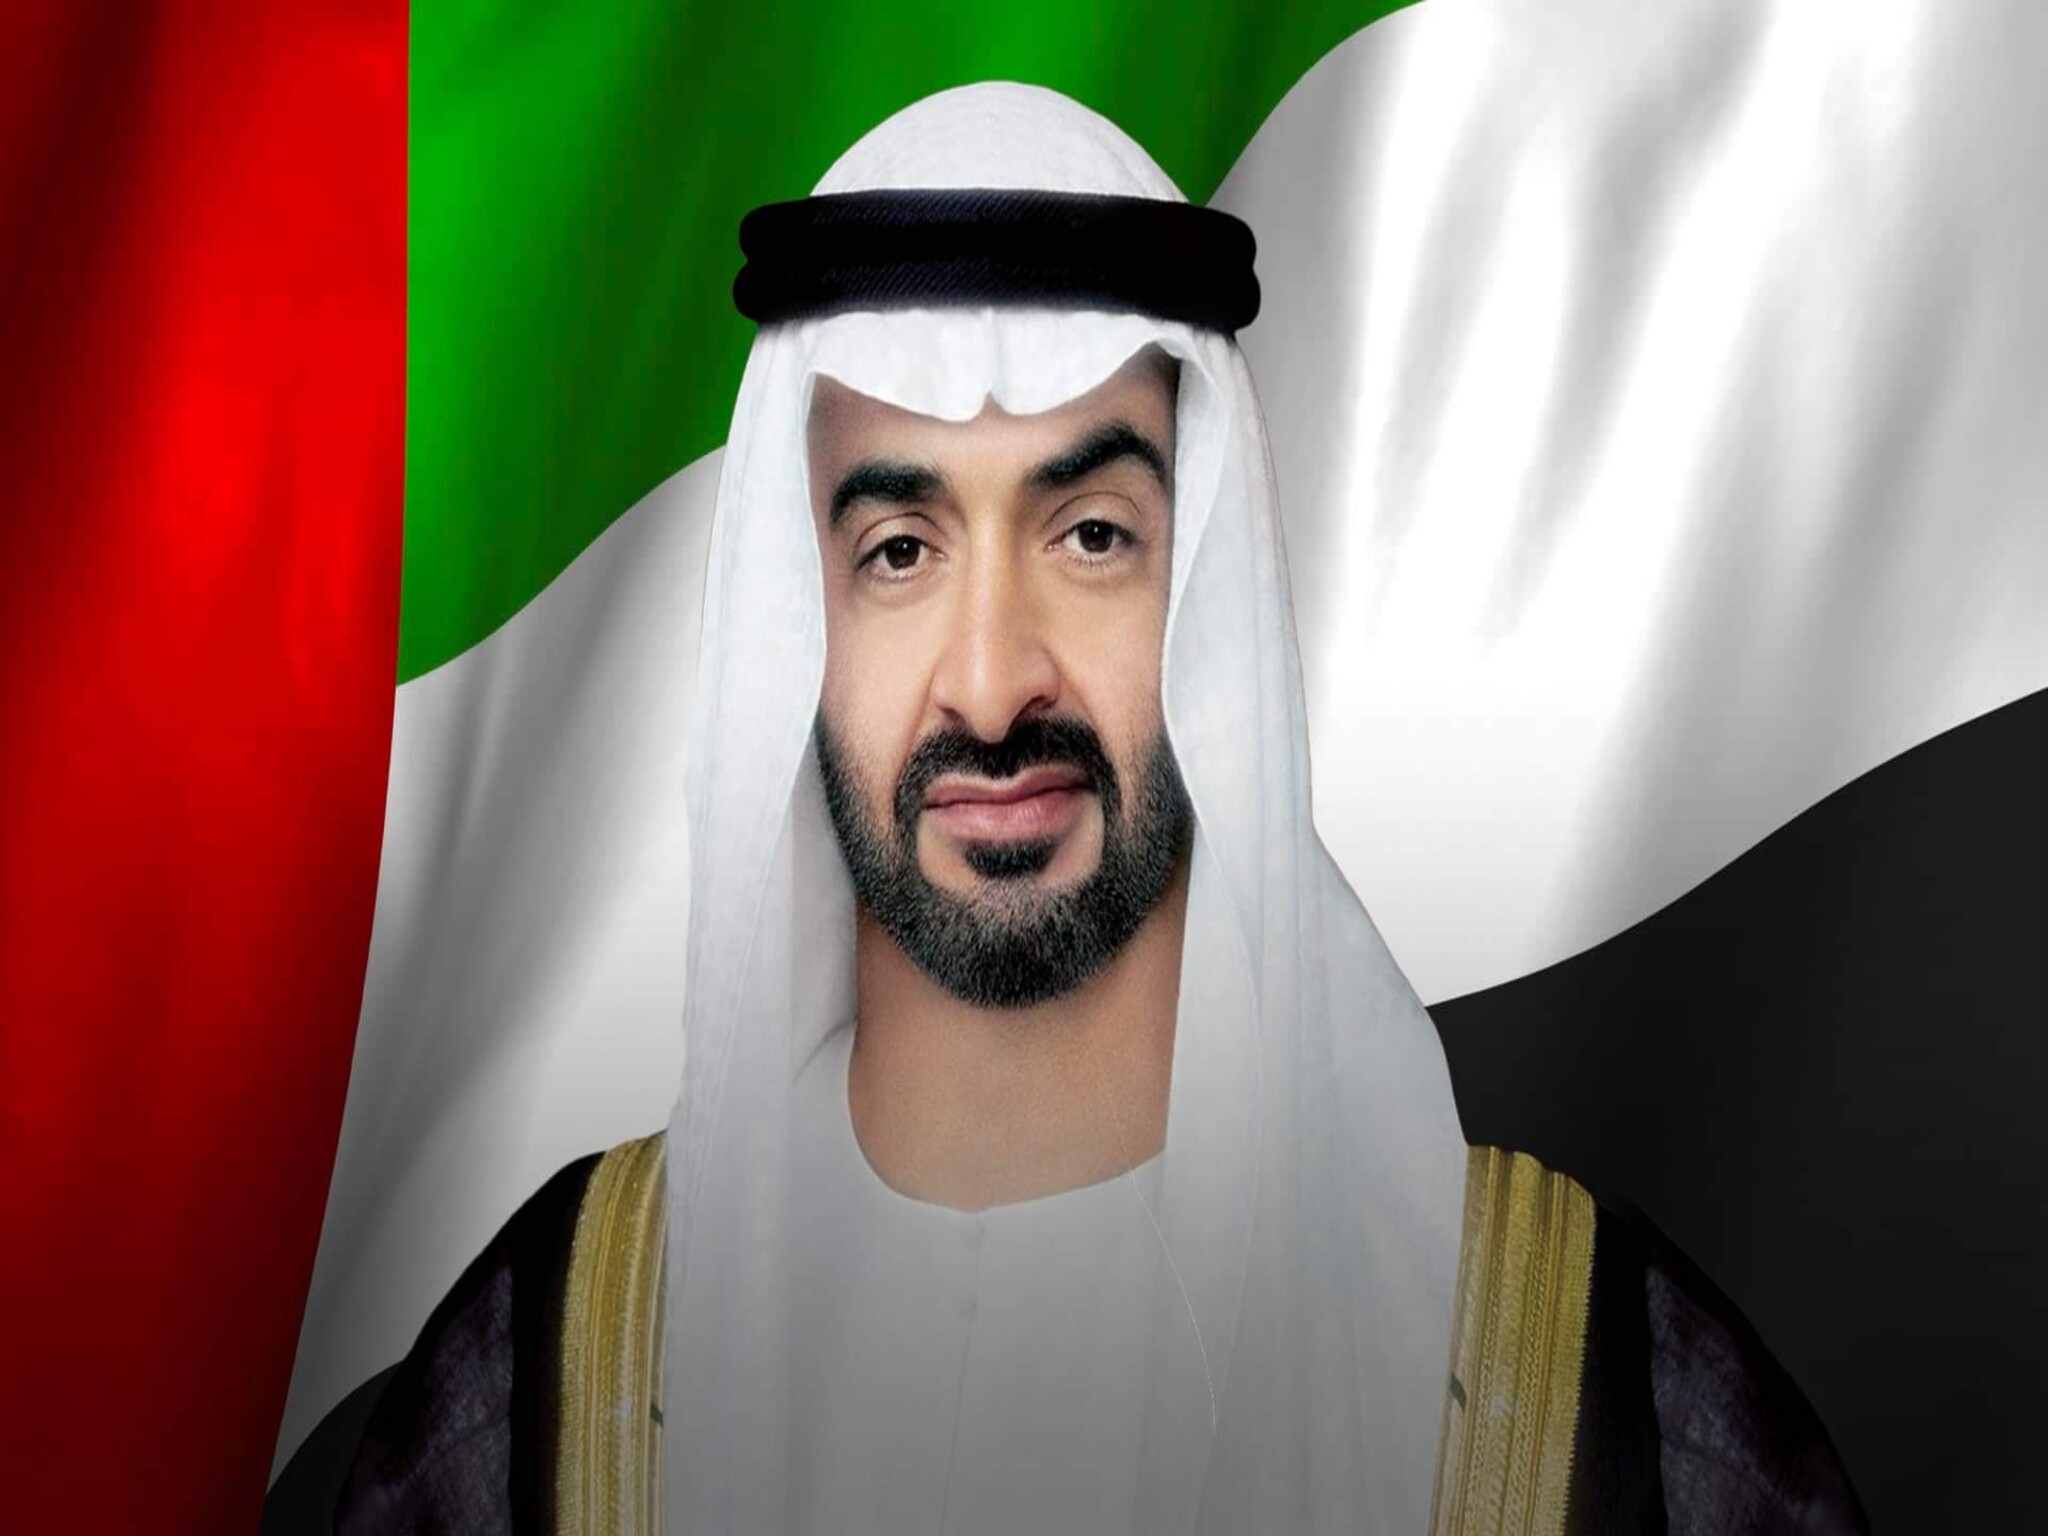 Statement by Sheikh Mohammed bin Zayed, “President of the State,” to all citizens and residents